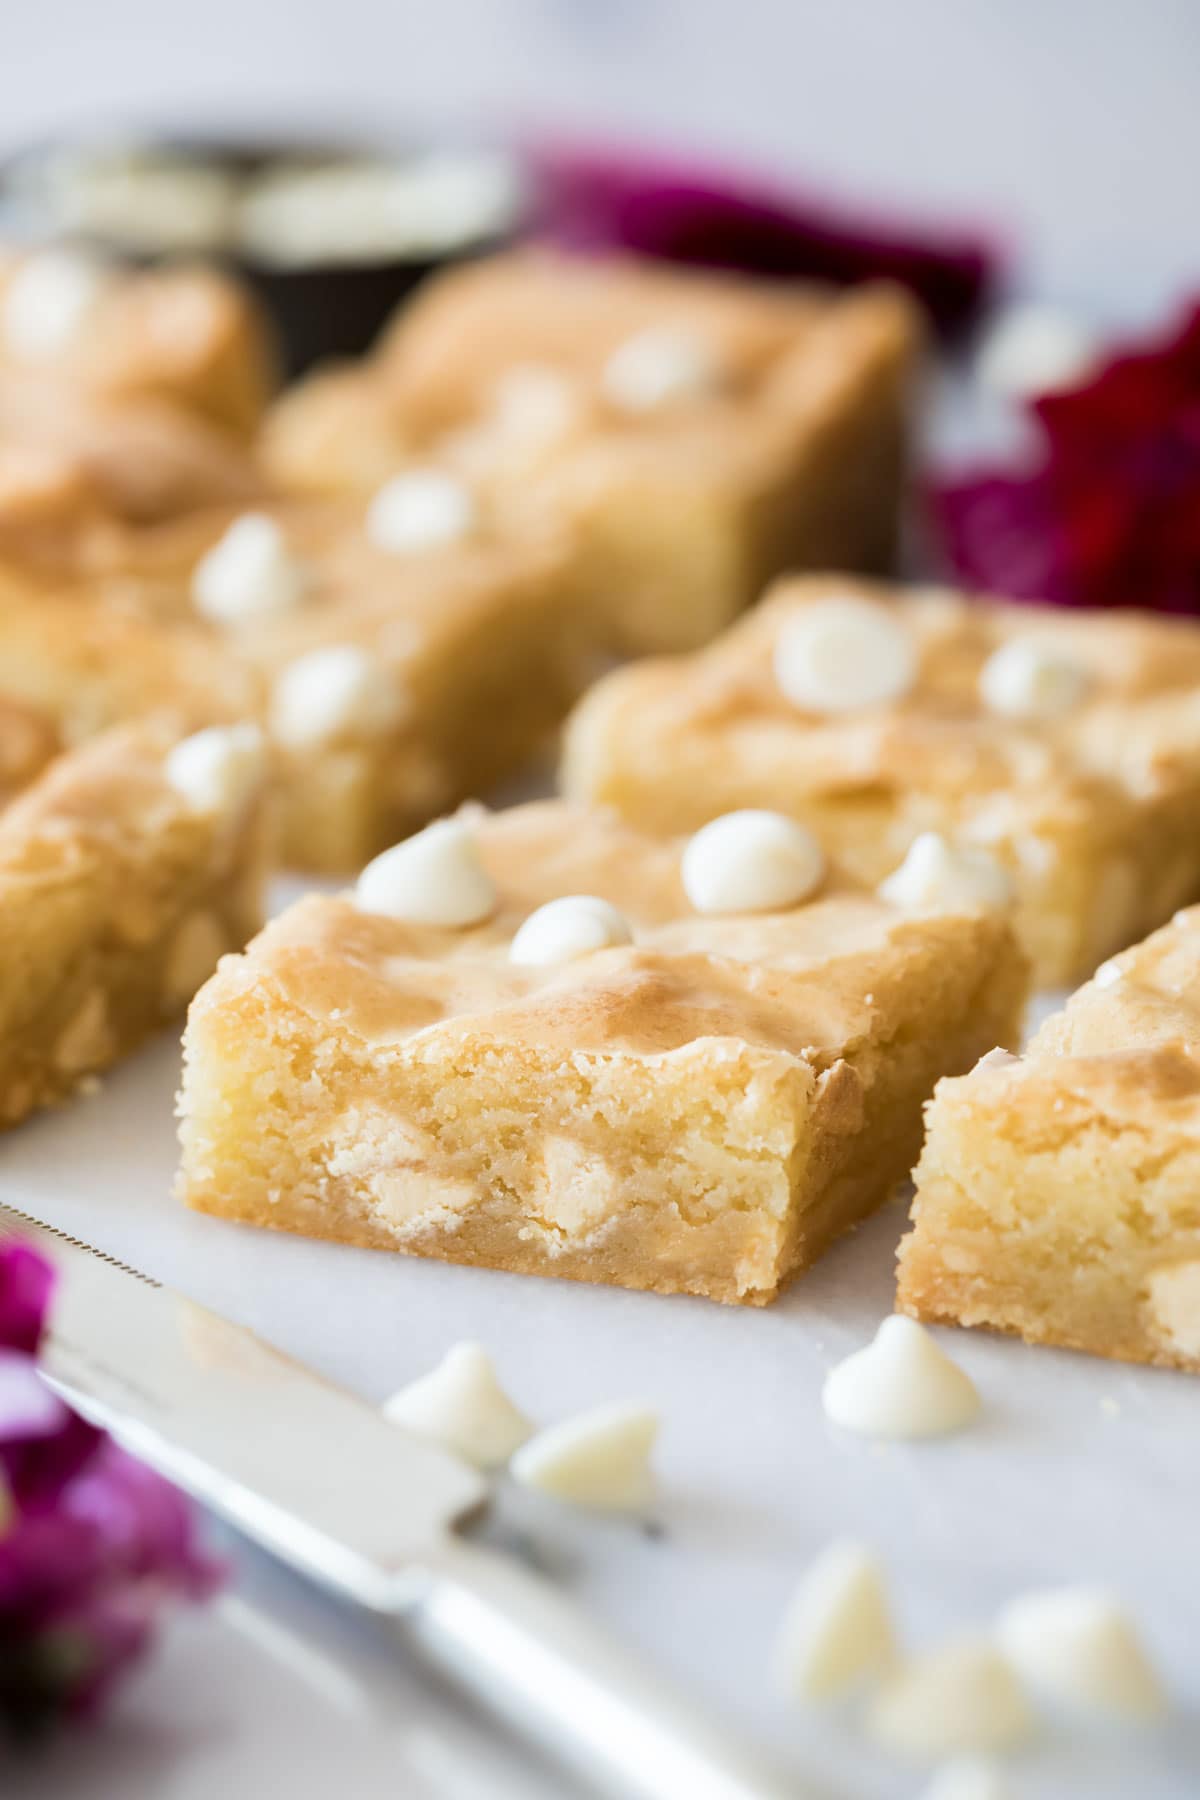 Close-up view of neatly-cut, caramel-colored brownies studded with white chocolate chips.